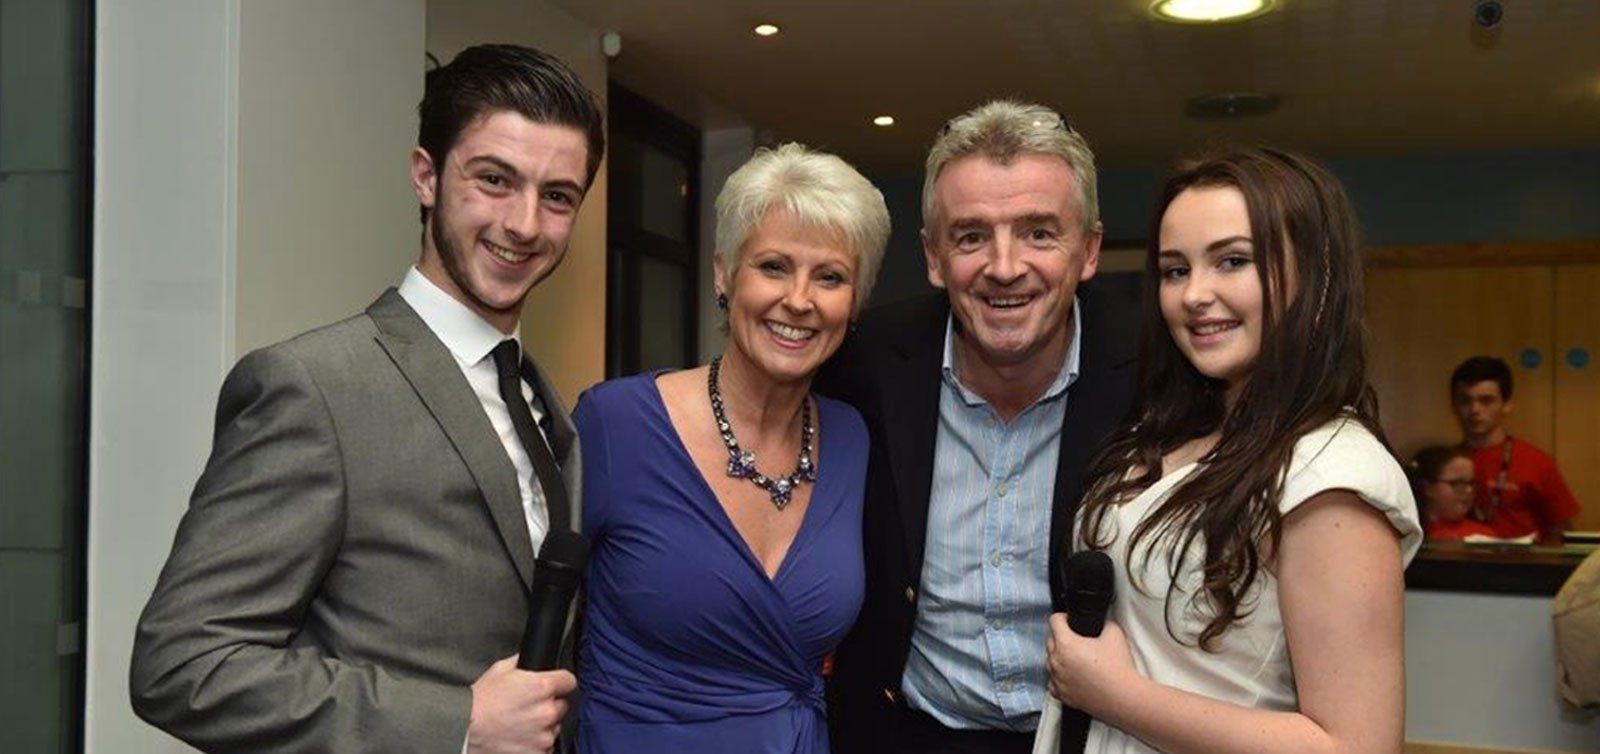 Michael O'Leary and Pamela Ballentine